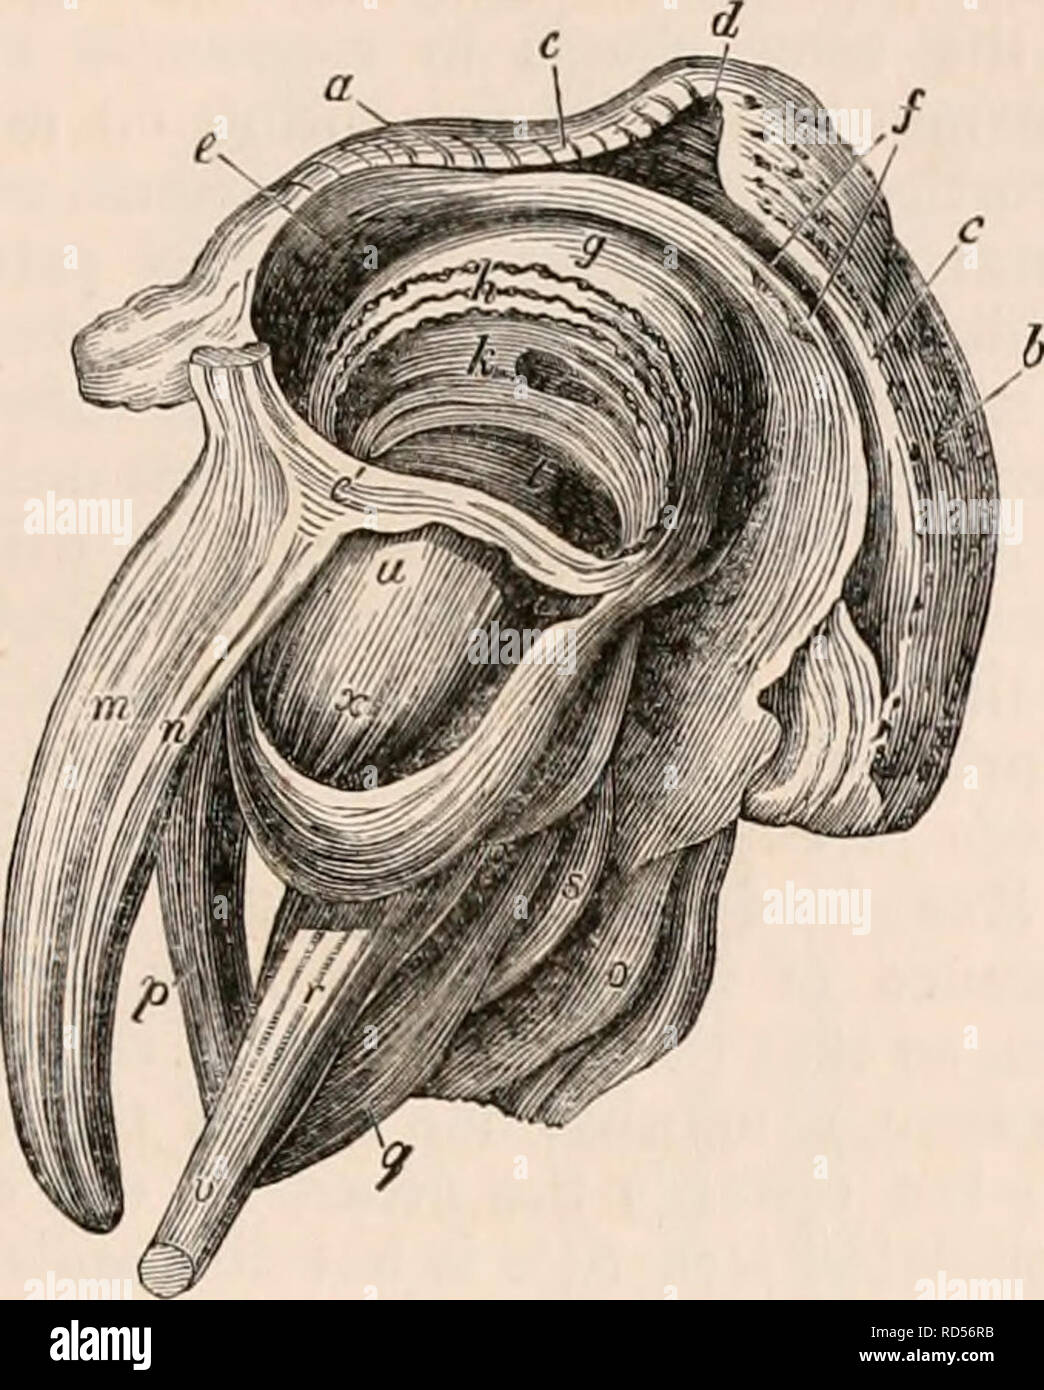 . The cyclopædia of anatomy and physiology. Anatomy; Physiology; Zoology. REPTILIA. 315 outwards over the eye-ball, while at the same time it rotates the eye-ball inwards beneath the membrane, the muscle being attached to move- Fift. 229.. An external View of the Eye, Eyelids, Muscles, Sfc. of a Crocodile. {After John Hunter?) a, the external surface of the upper eyelid; b, the external surface of the under eyelid; c, points to the edge of both eyelids; d, the inner angle or canthus of both eyelids; e e, the internal surface of the eye- lids covered by the tunica conjunctiva; /, point, to the  Stock Photo